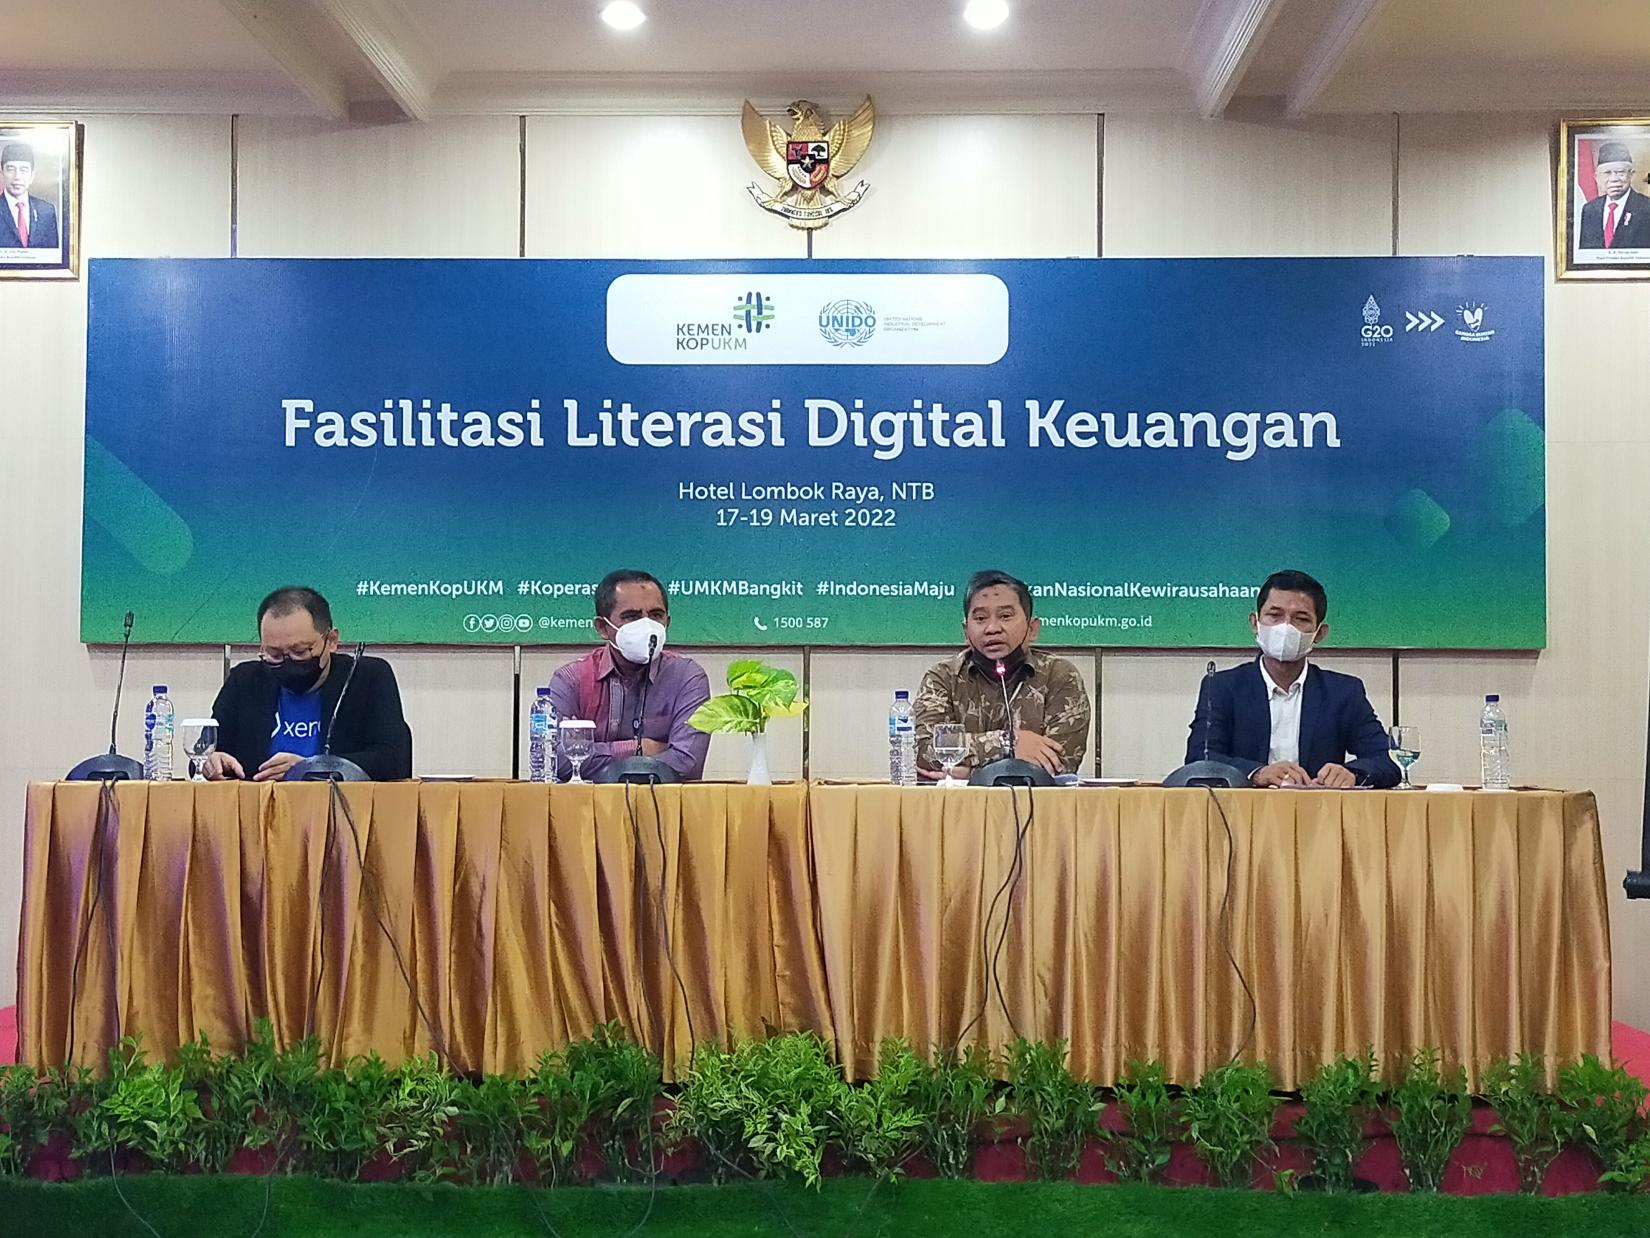 Digital financial literacy training jointly held by UNIDO and the Ministry of Cooperatives and SMEs for SMEs in Lombok